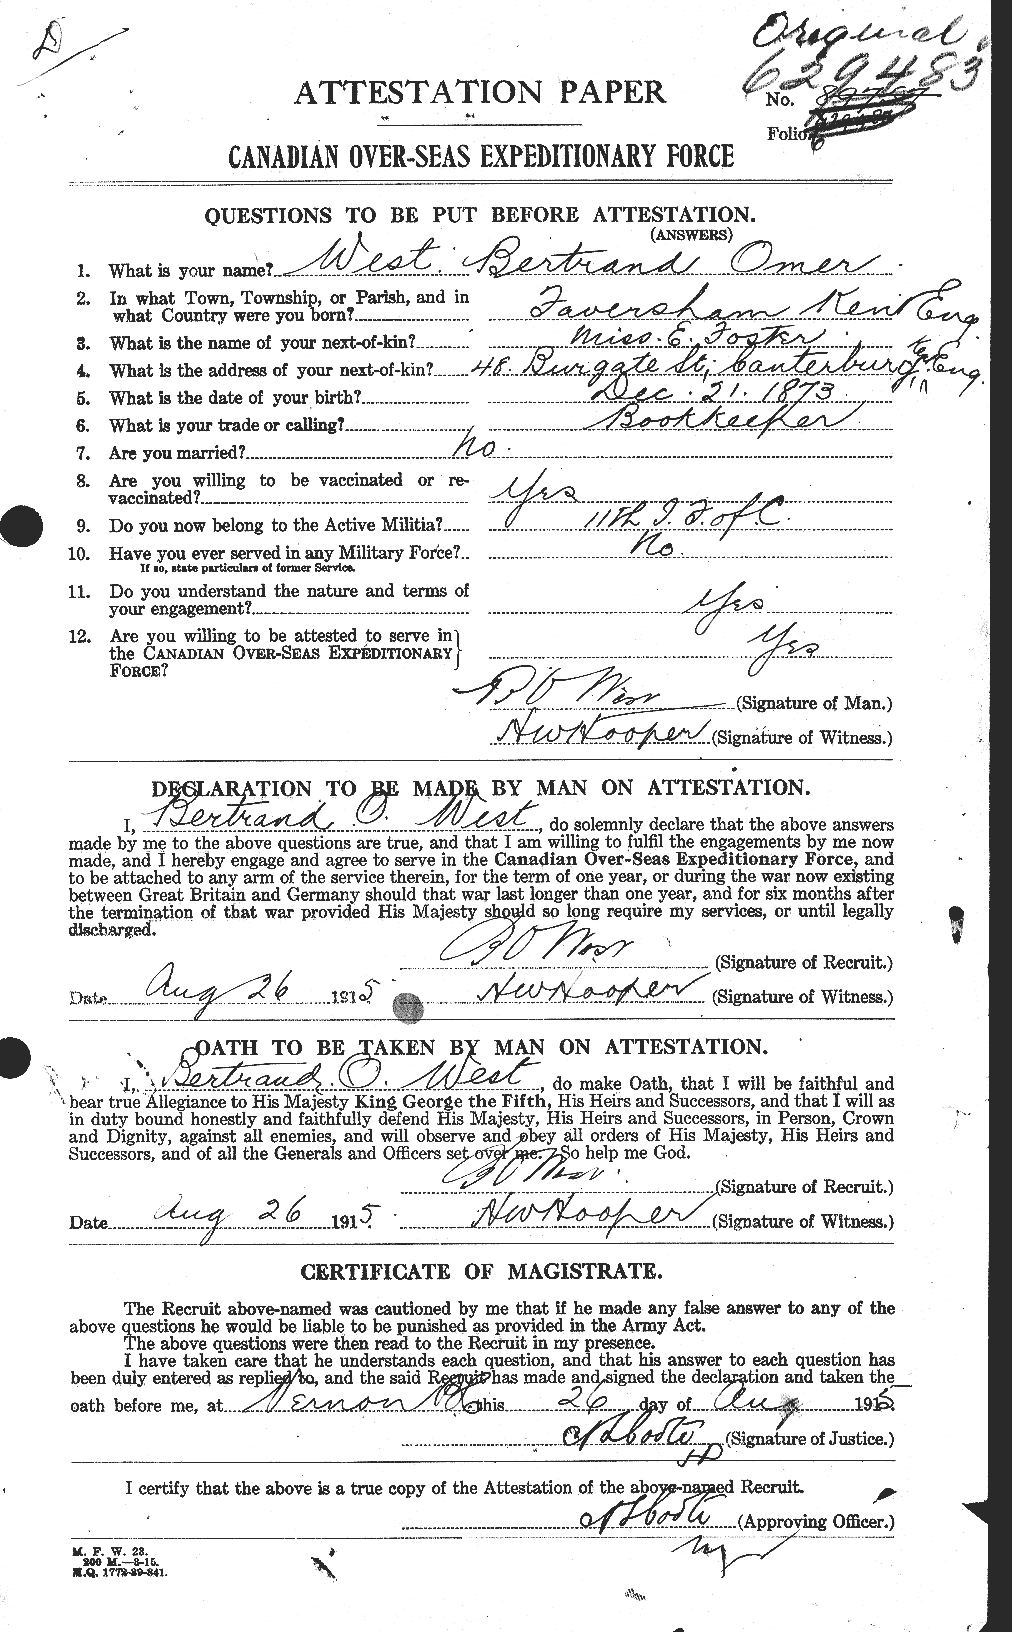 Personnel Records of the First World War - CEF 666074a